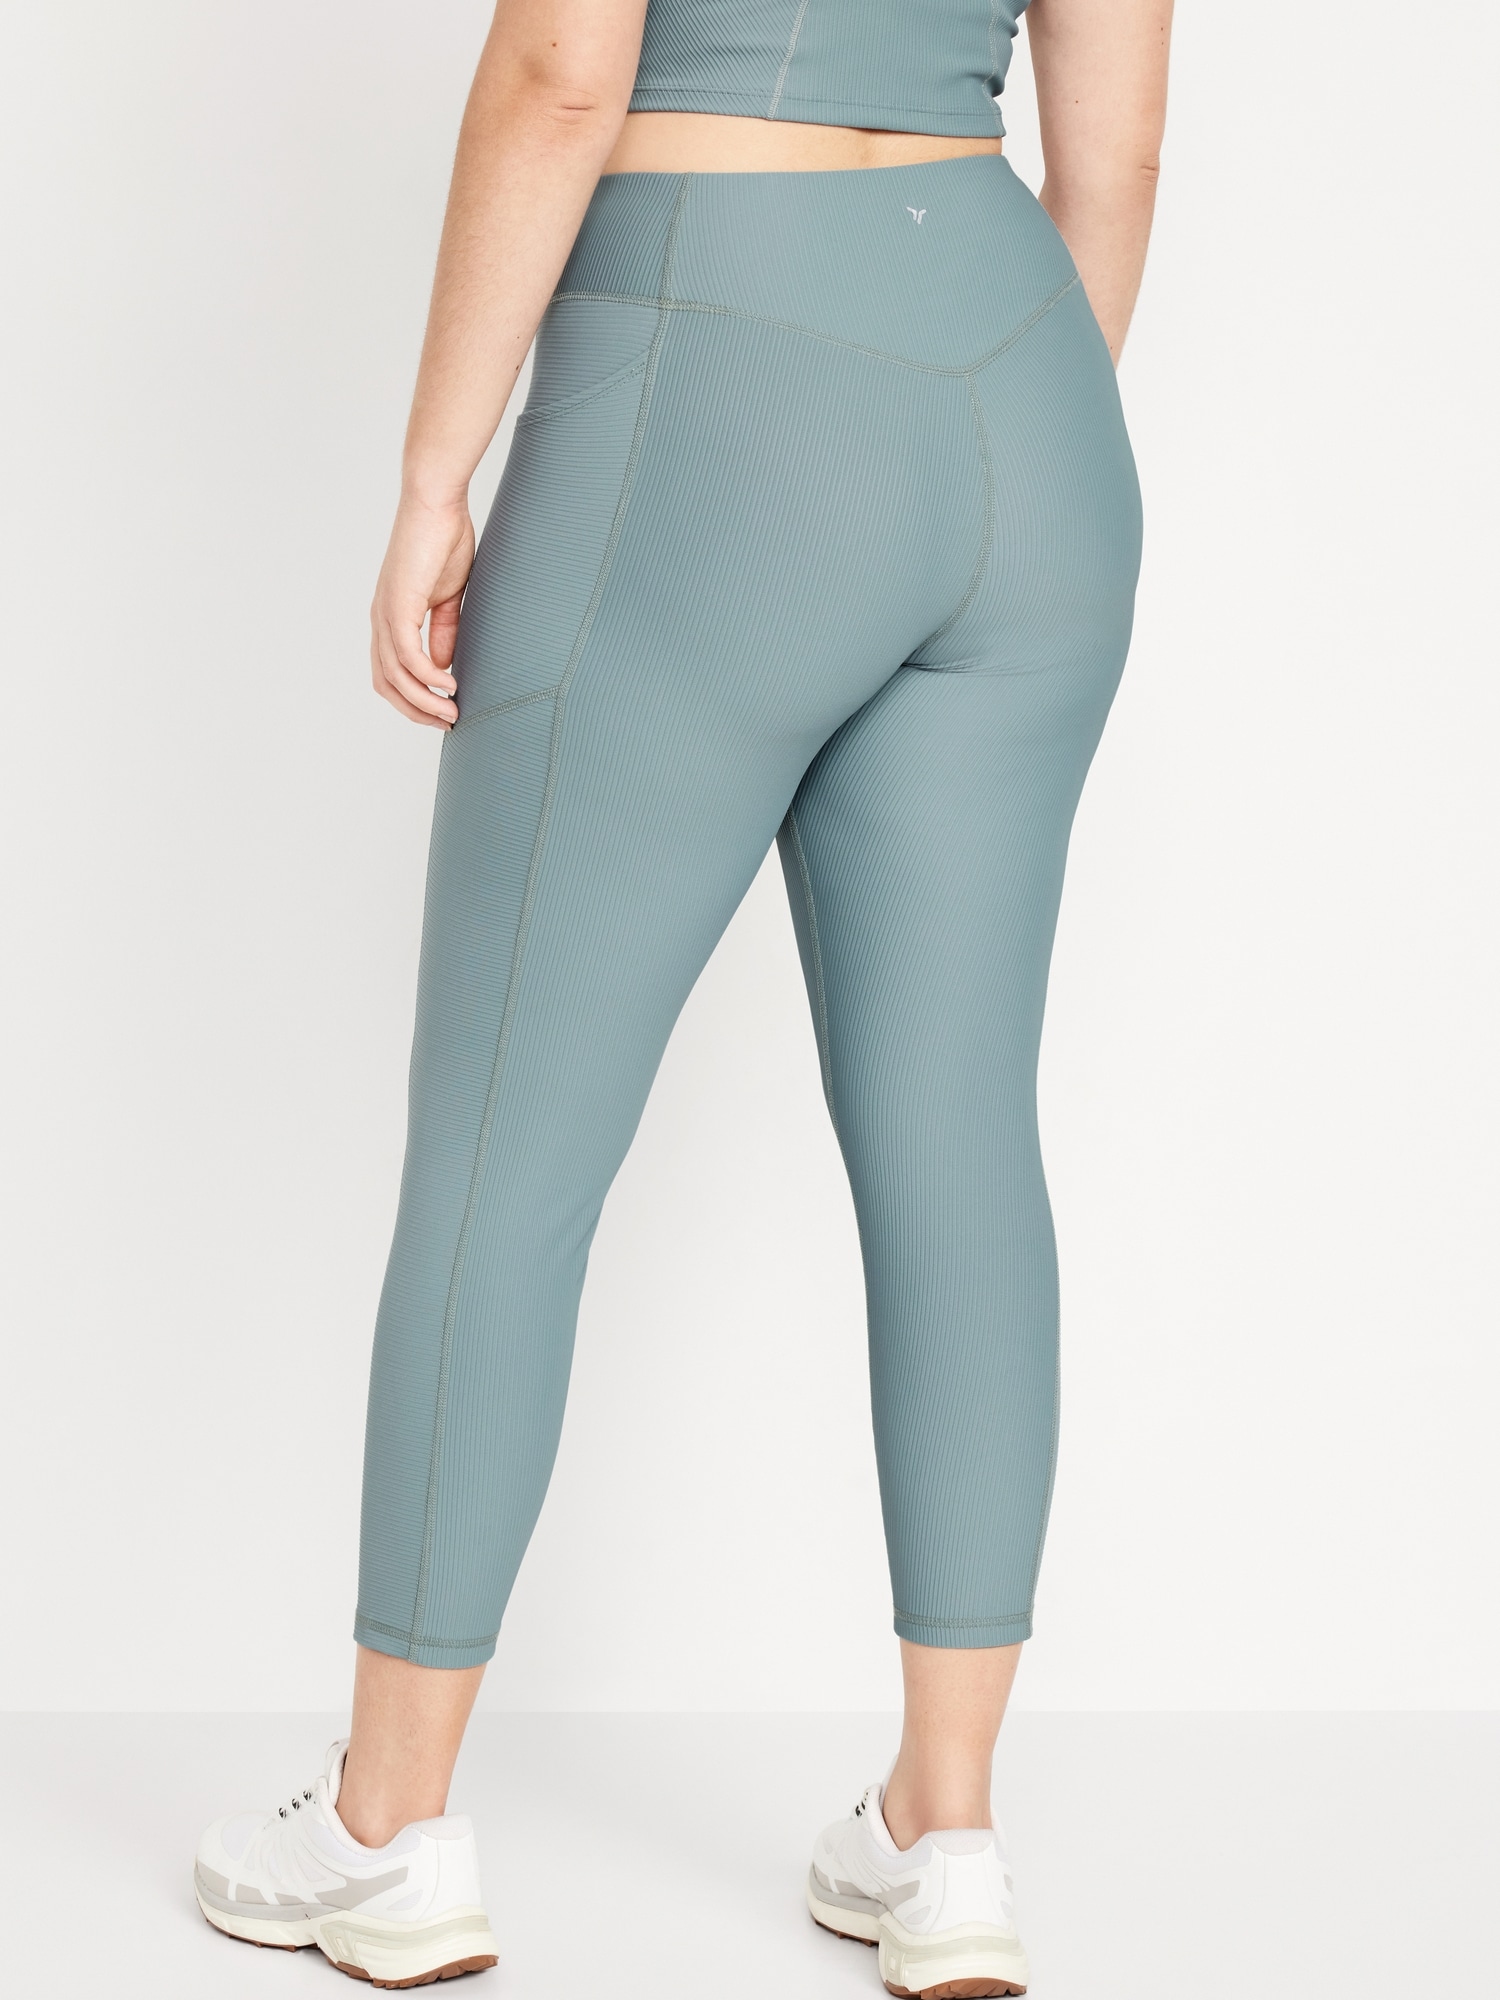 Absolutely love these 2 pocket, high waisted leggings. Slimming and co